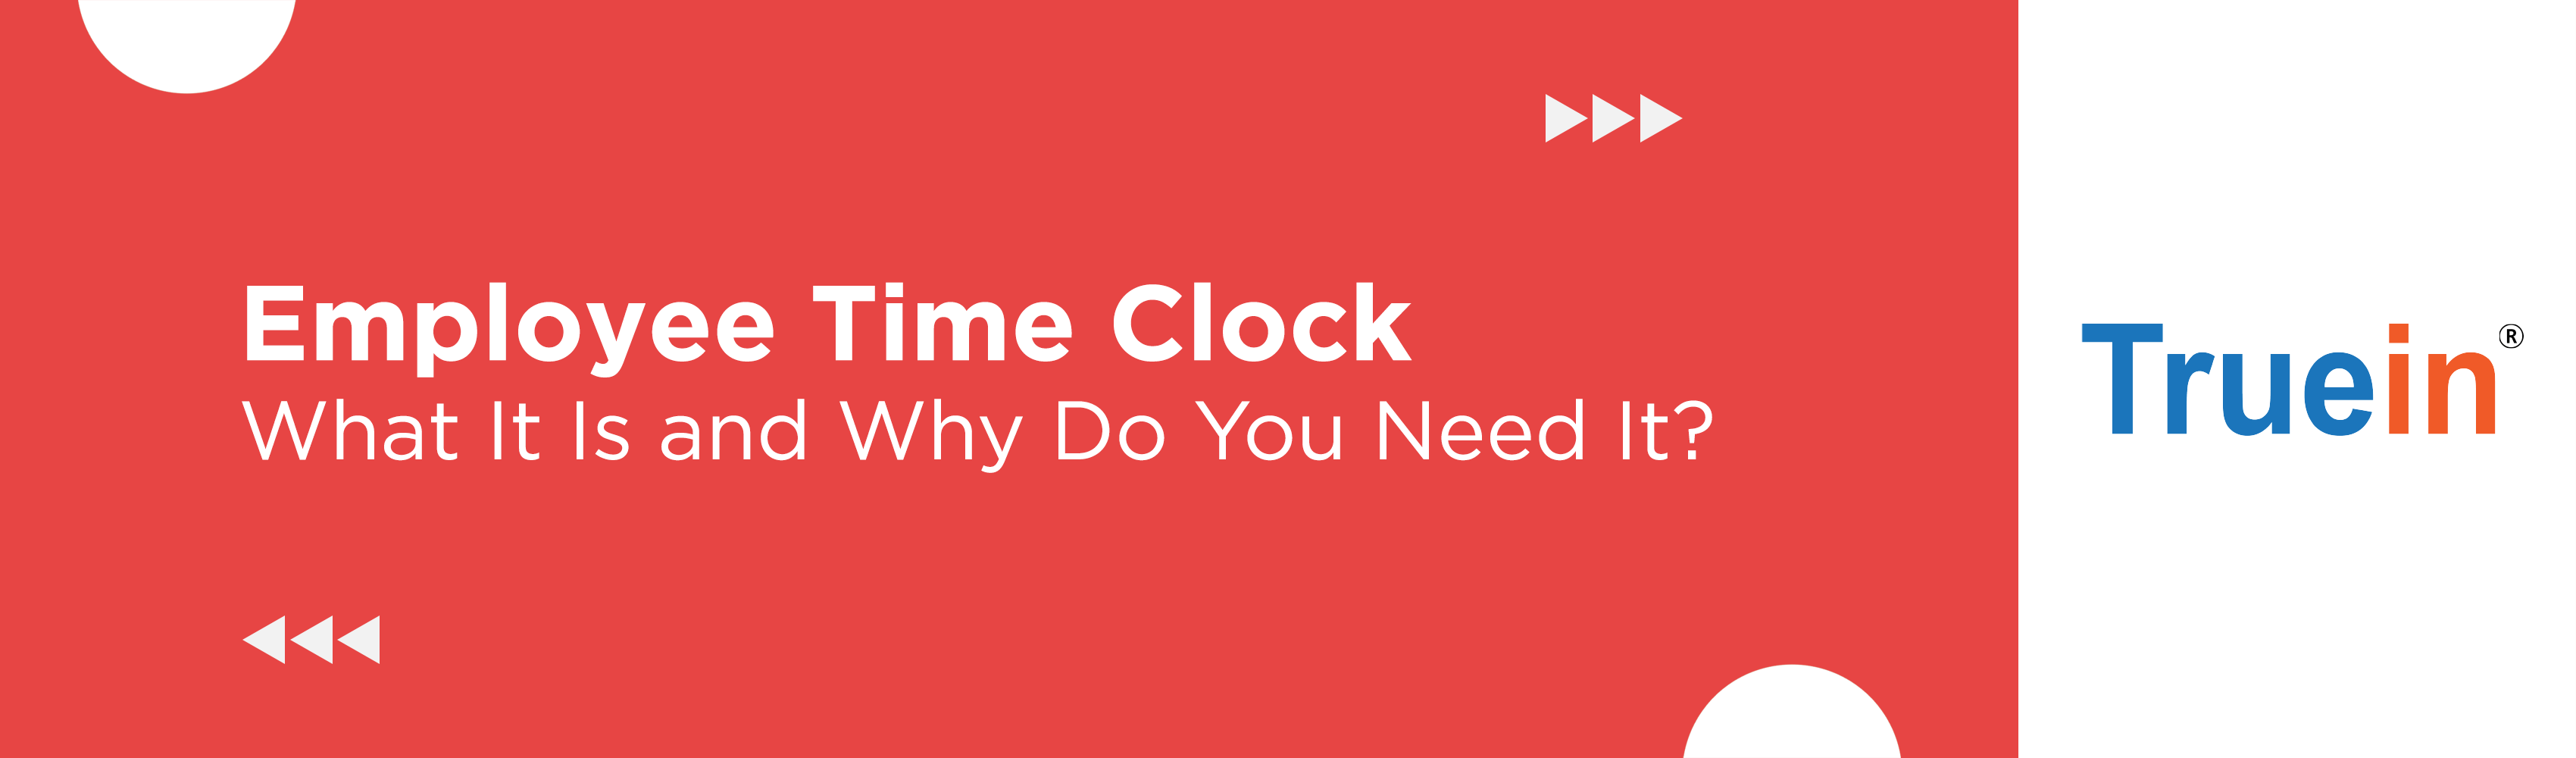 What Is An Employee Time Clock, and Why Do You Need It?